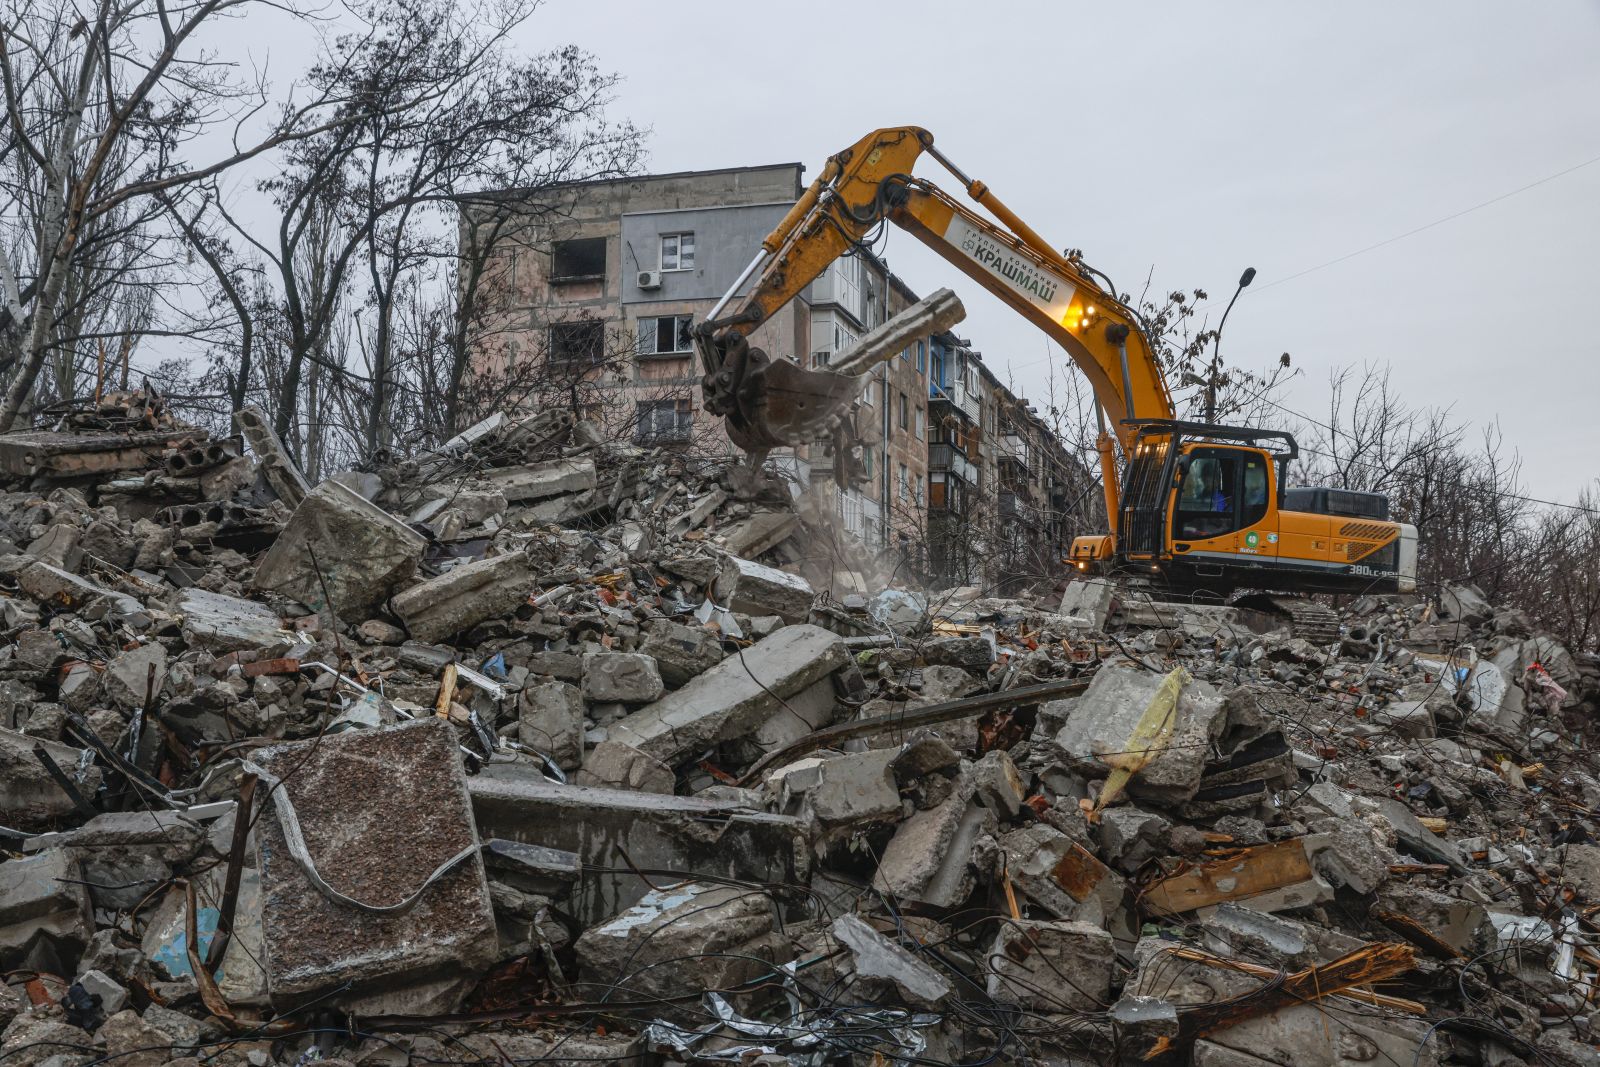 epa10362469 An excavator cleans debris of a destroyed building in downtown of Mariupol, Ukraine, 12 December 2022. Mariupol had seen a long battle for its control between the Ukrainian forces and the Russian army and Russian backed separatist Donetsk People’s Republic (DPR) as well as a siege, the hostilities lasted from February to the end of May 2022 killing thousands of people and destroying most of the city in the process. According to the DPR government which took control after May 2022, more than five thousand builders are currently working in Mariupol, they expect the city to be completely rebuilt in three years' time.  EPA/SERGEI ILNITSKY